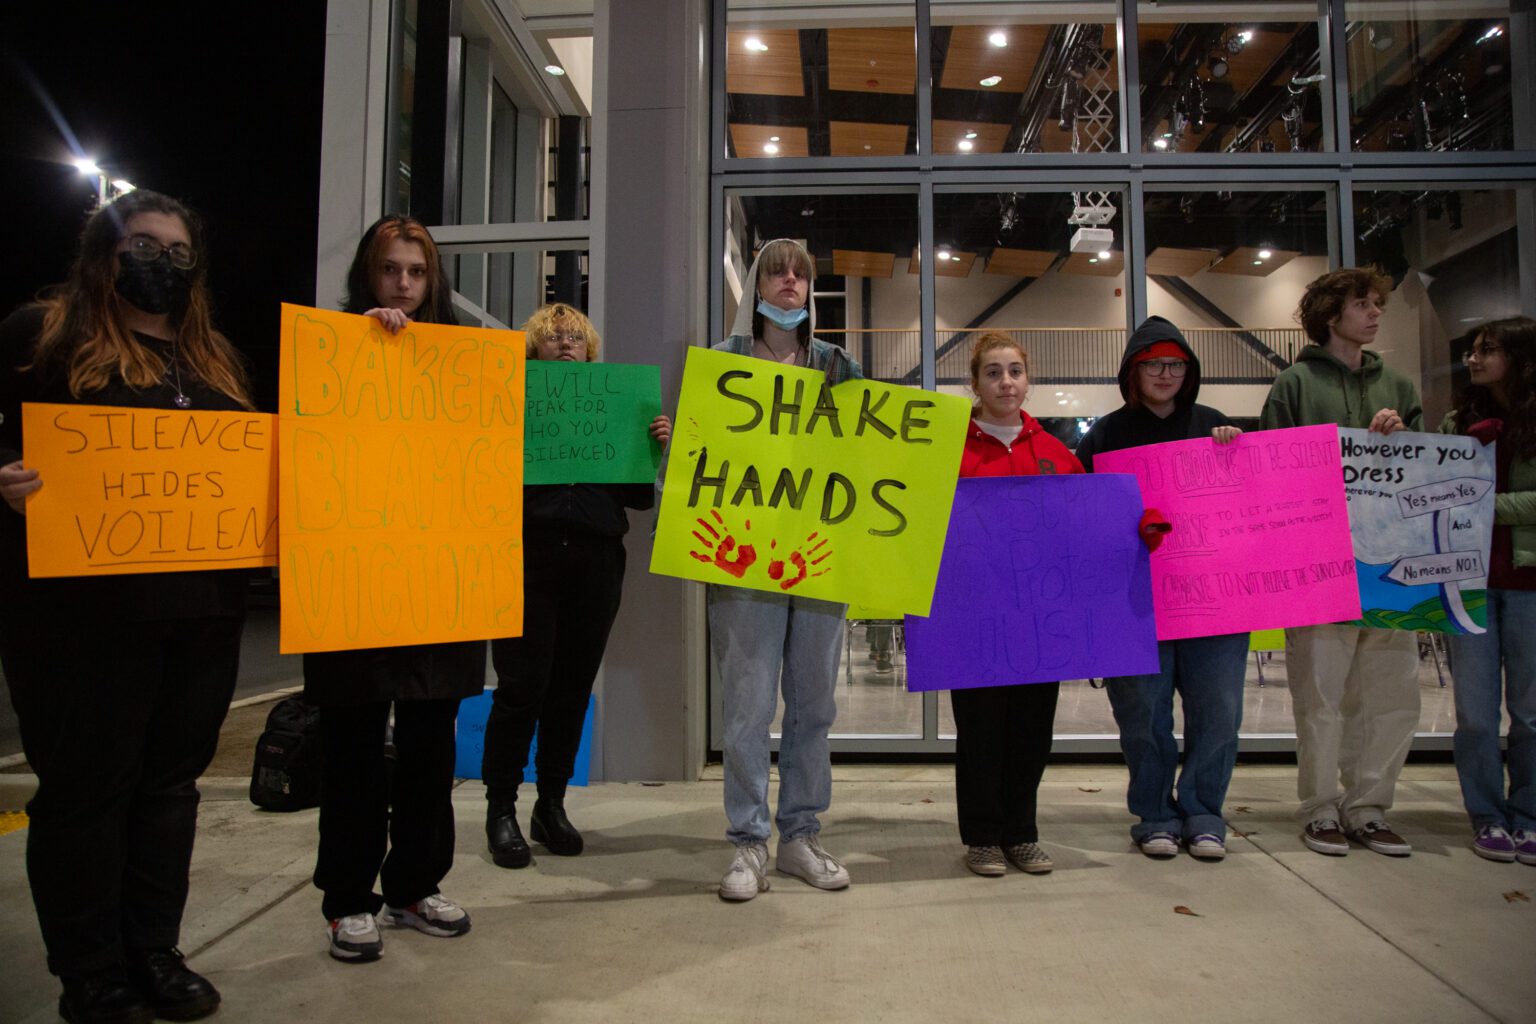 About two dozen students hold signs in protest before a school board meeting at Options High School on Dec. 14. The signs condemn Bellingham Public Schools for the alleged failure of three assistant principals to report the sexual assaults of a Squalicum High School student.